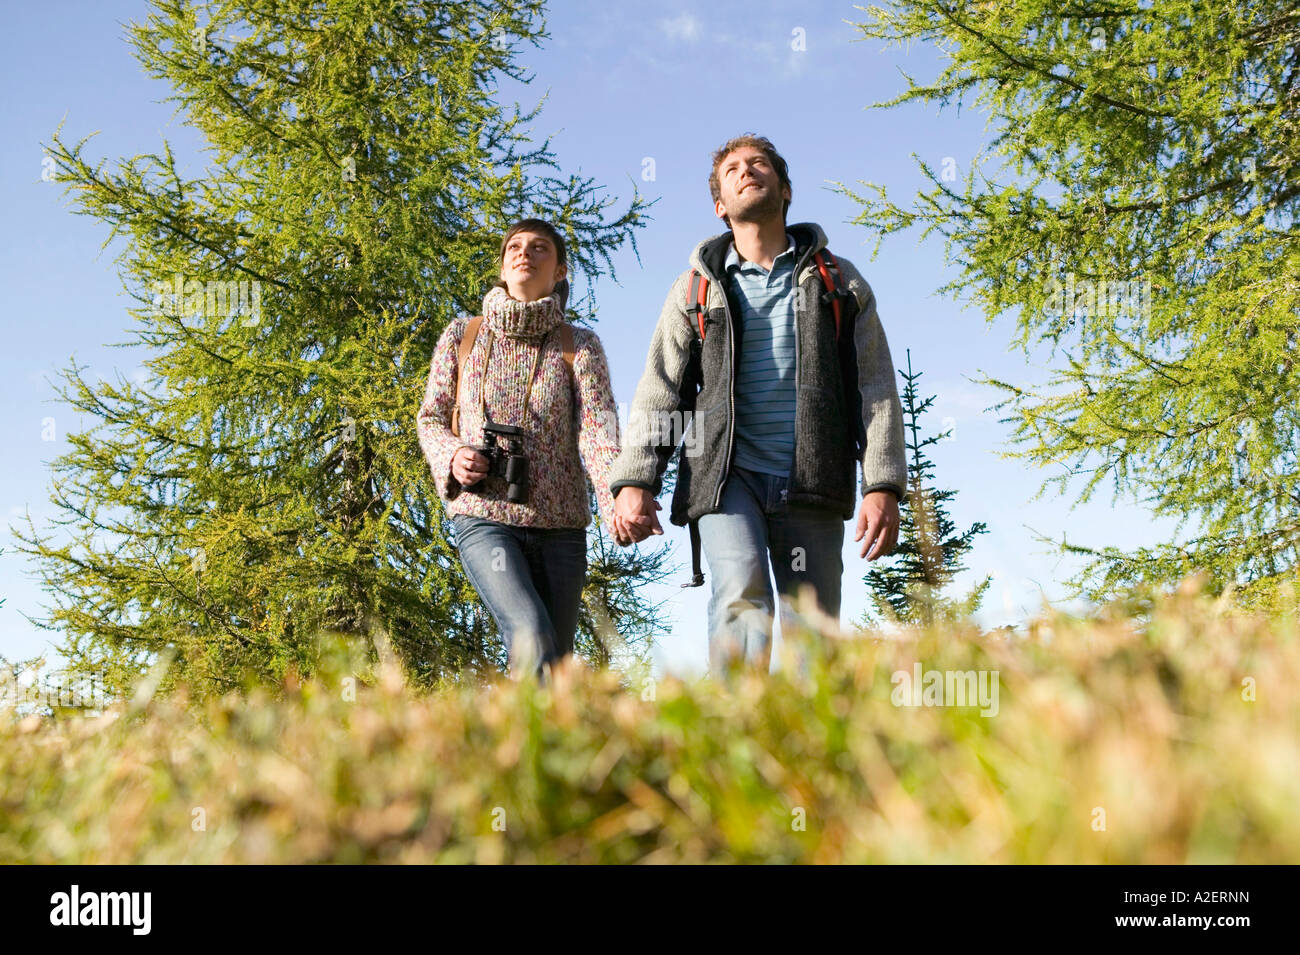 Young couple walking in meadow holding hands Stock Photo